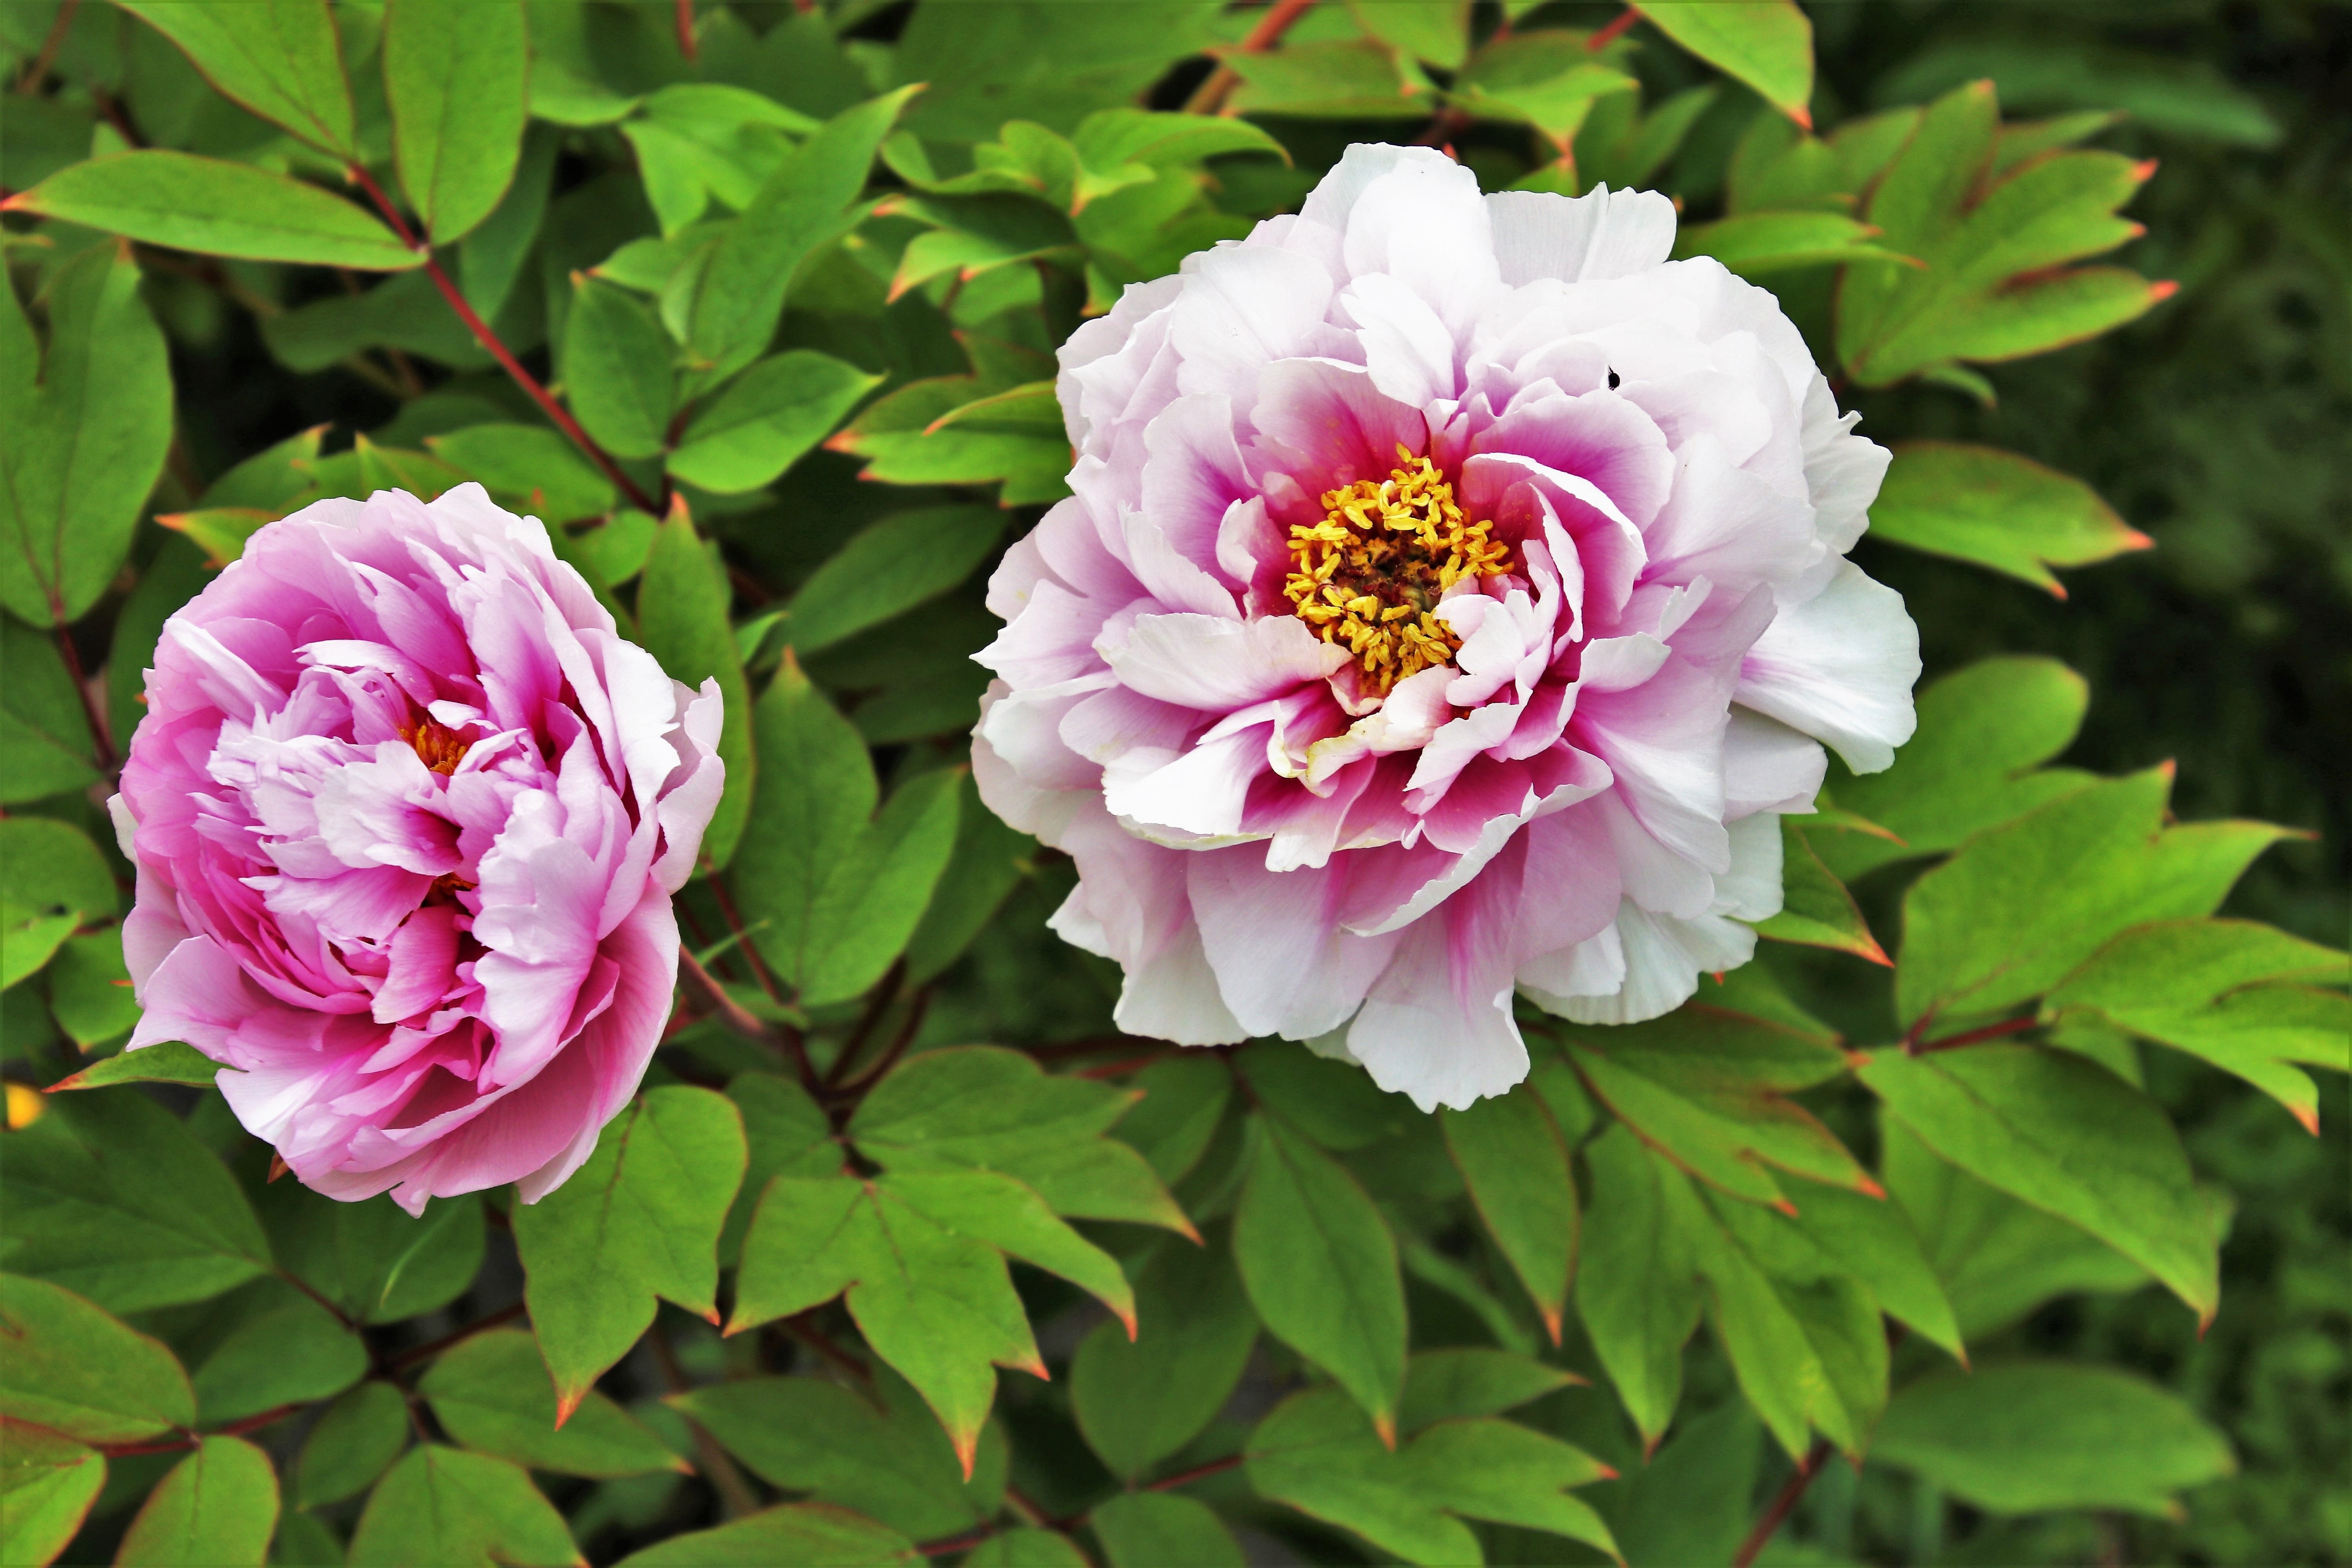 two pink peony flowers, spring, may, plant, nature, garden, leaf